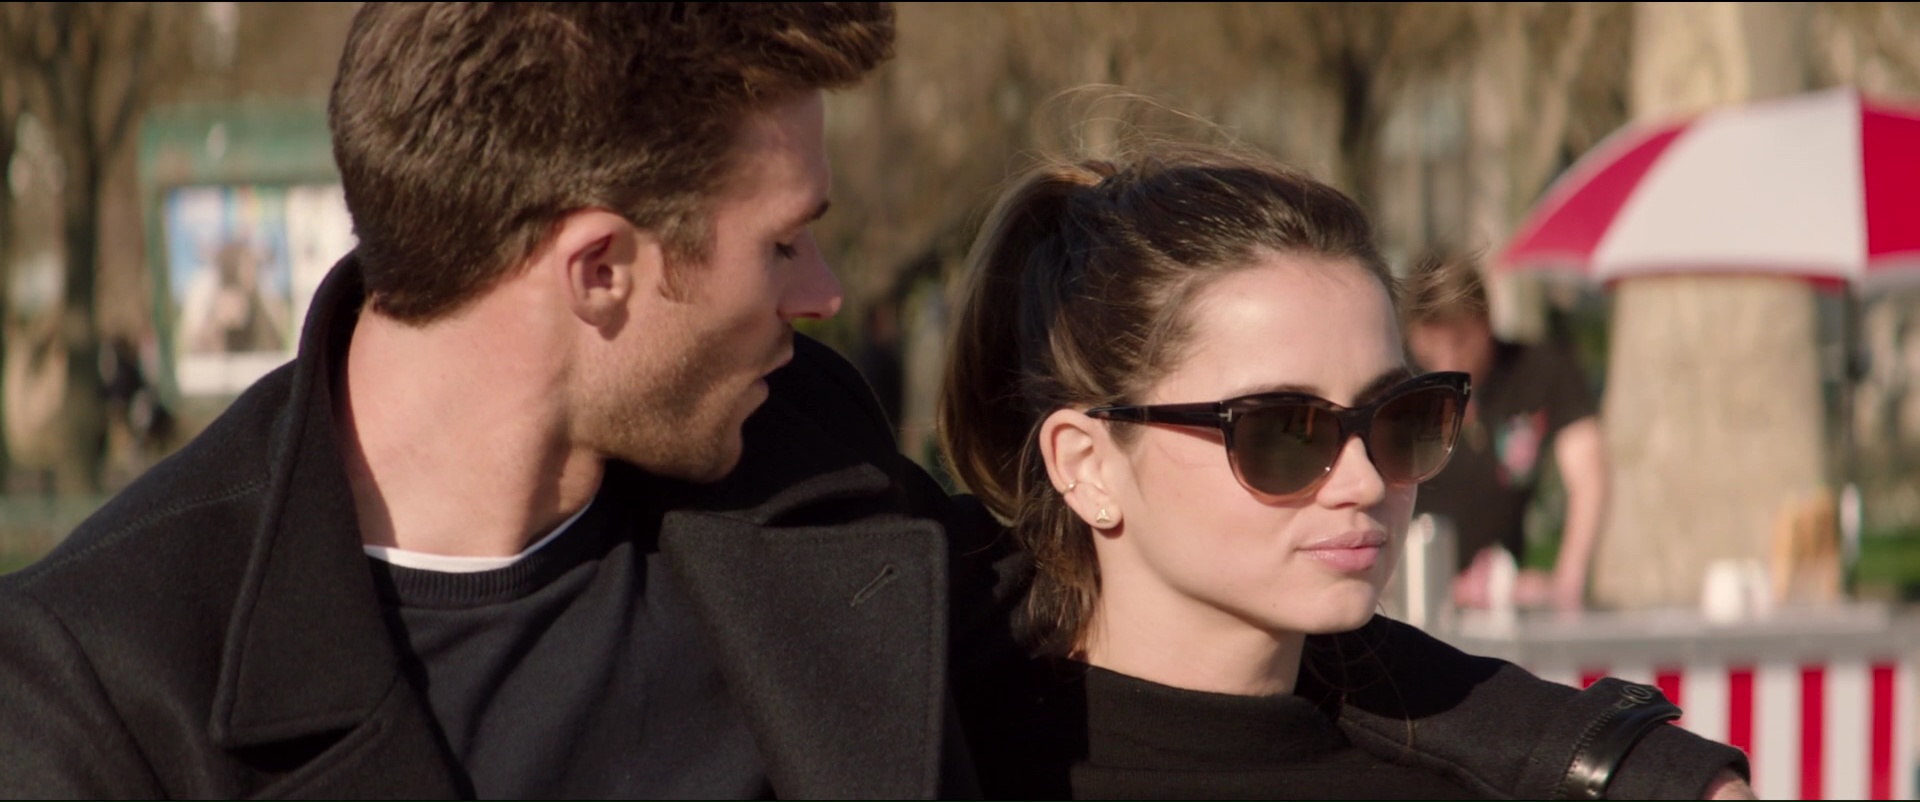 Tom Ford Sunglasses Worn by Ana de Armas in Overdrive (2017) Movie1920 x 802